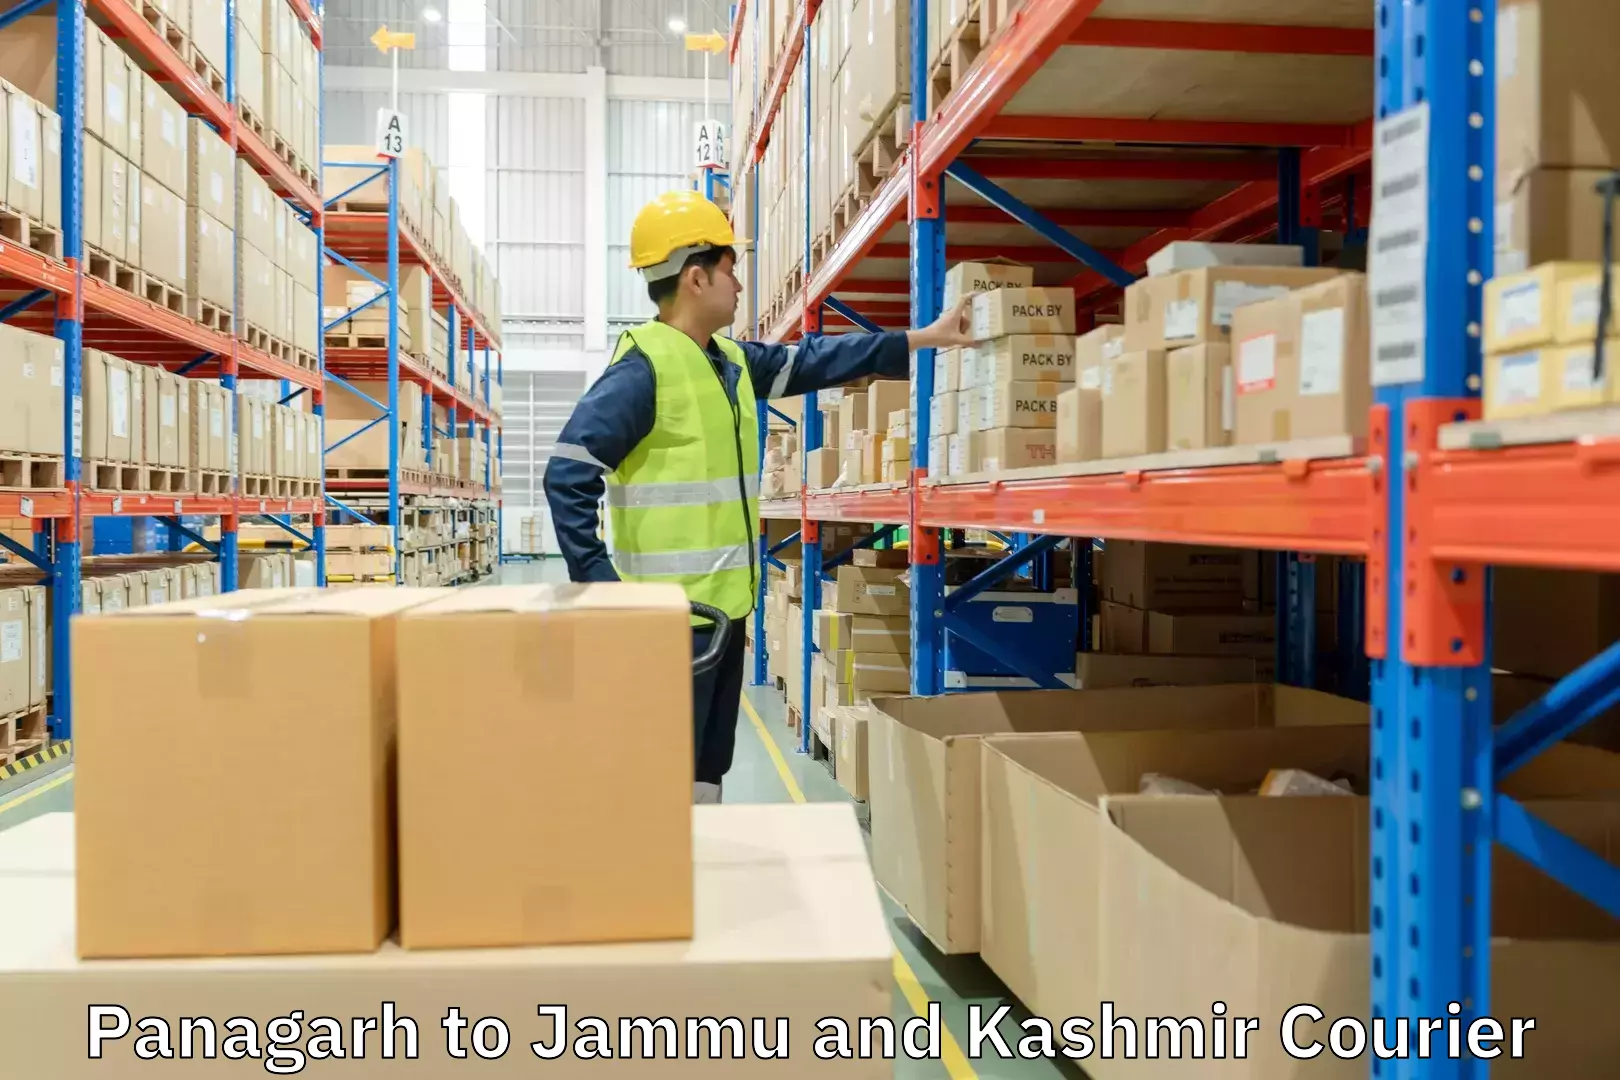 Cargo delivery service Panagarh to Jammu and Kashmir